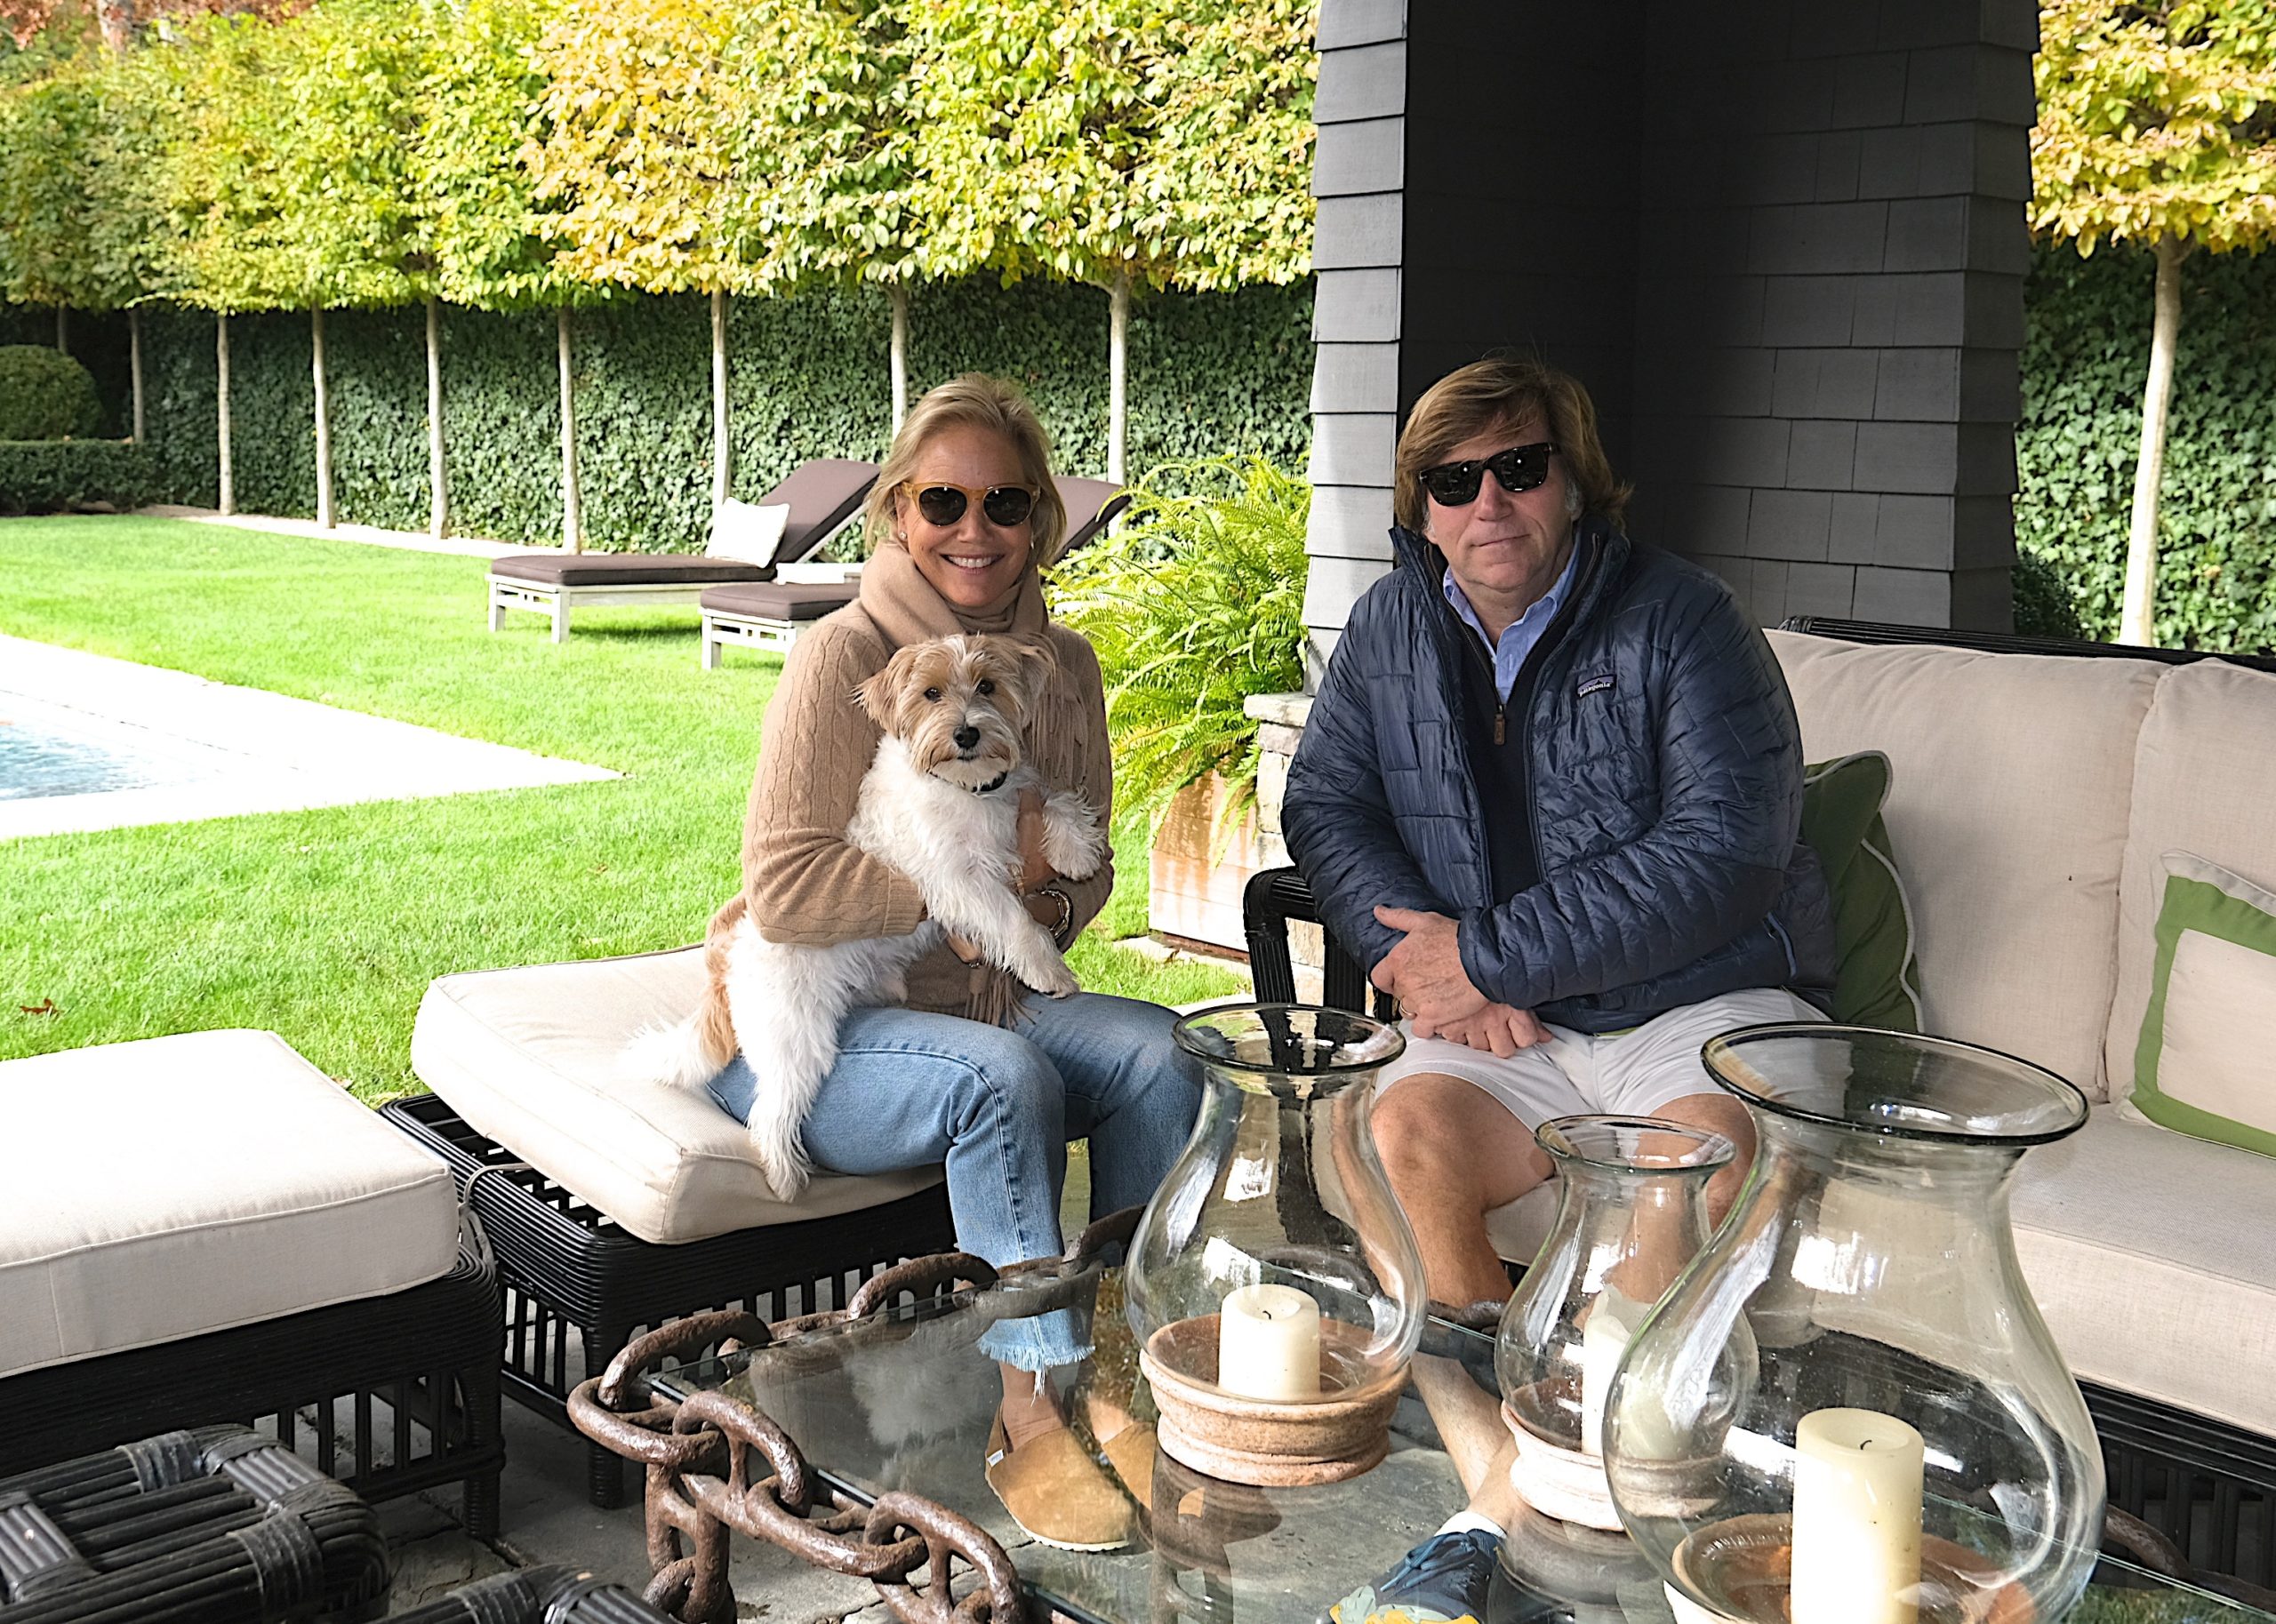 Dwyer and Michael Derrig at their home on Wireless Road in East Hampton. The home will be featured on the East Hampton House & Garden Tour set for Saturday, November 27. It benefits the East Hampton Historical Society.